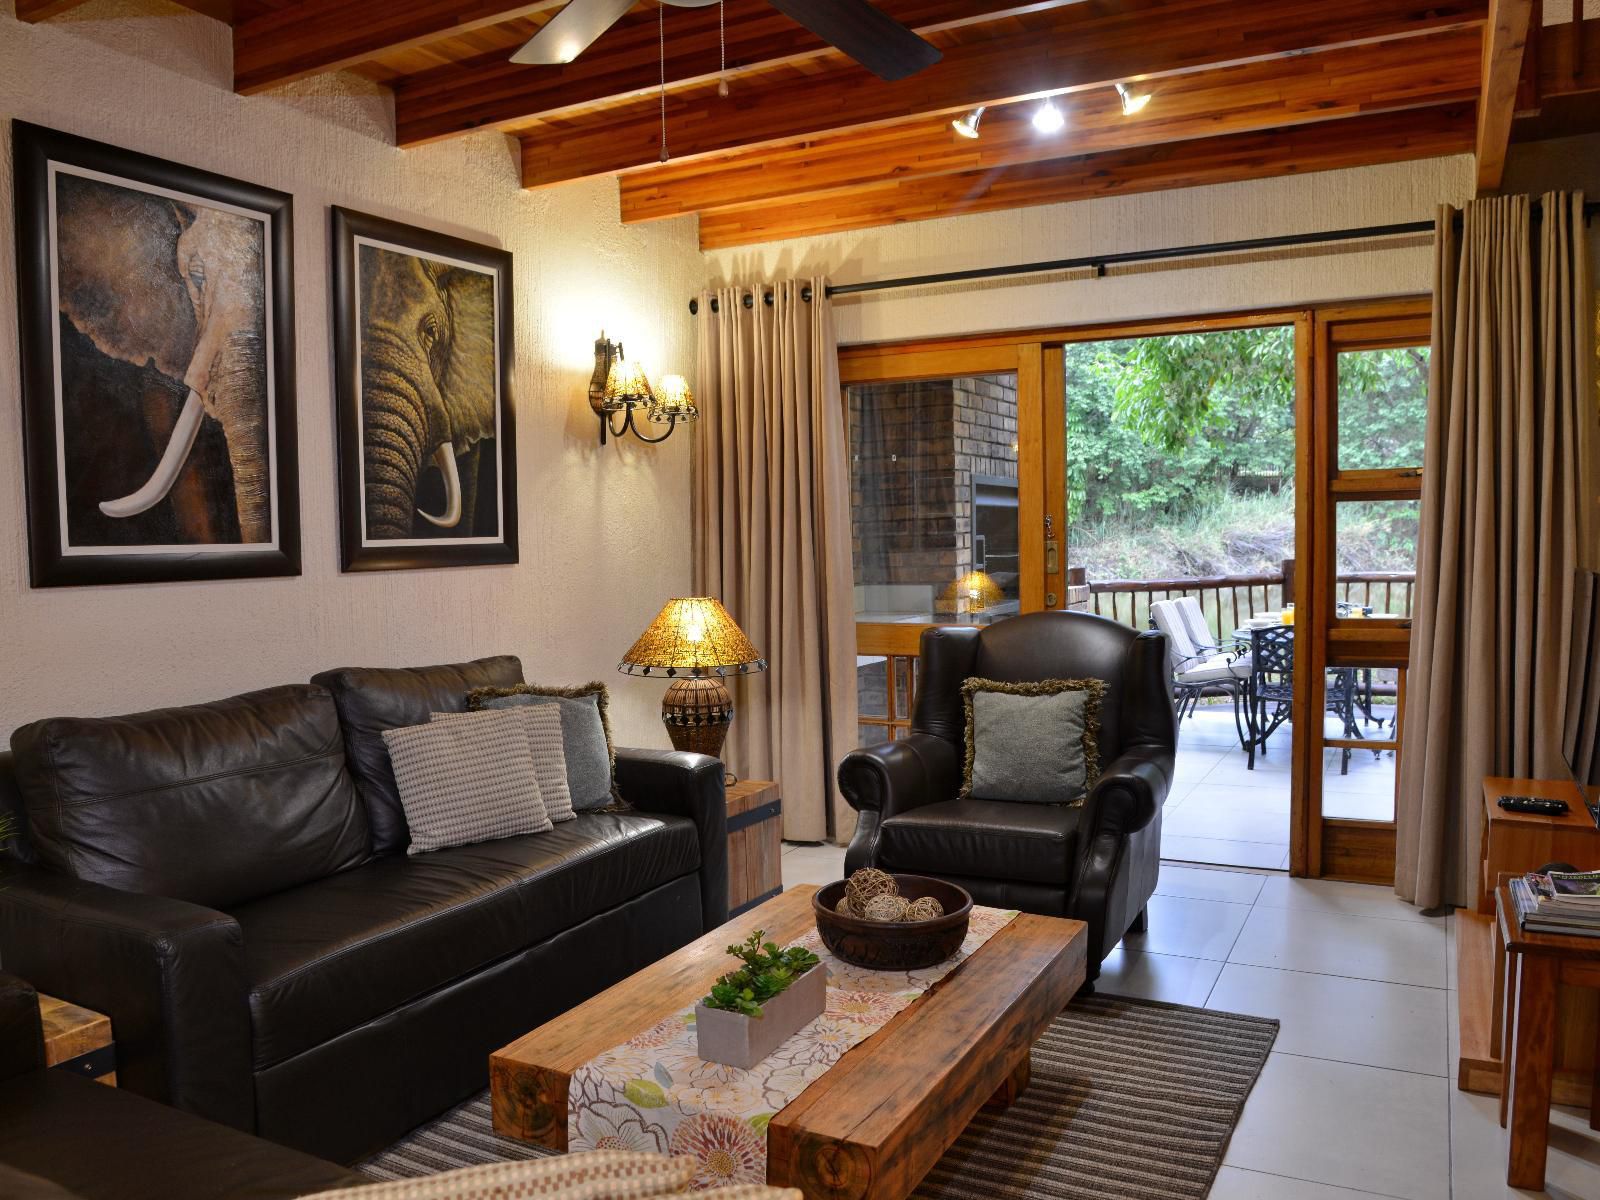 Cambalala Kruger Park Lodge Luxury Self Catering Unit Hazyview Mpumalanga South Africa Living Room